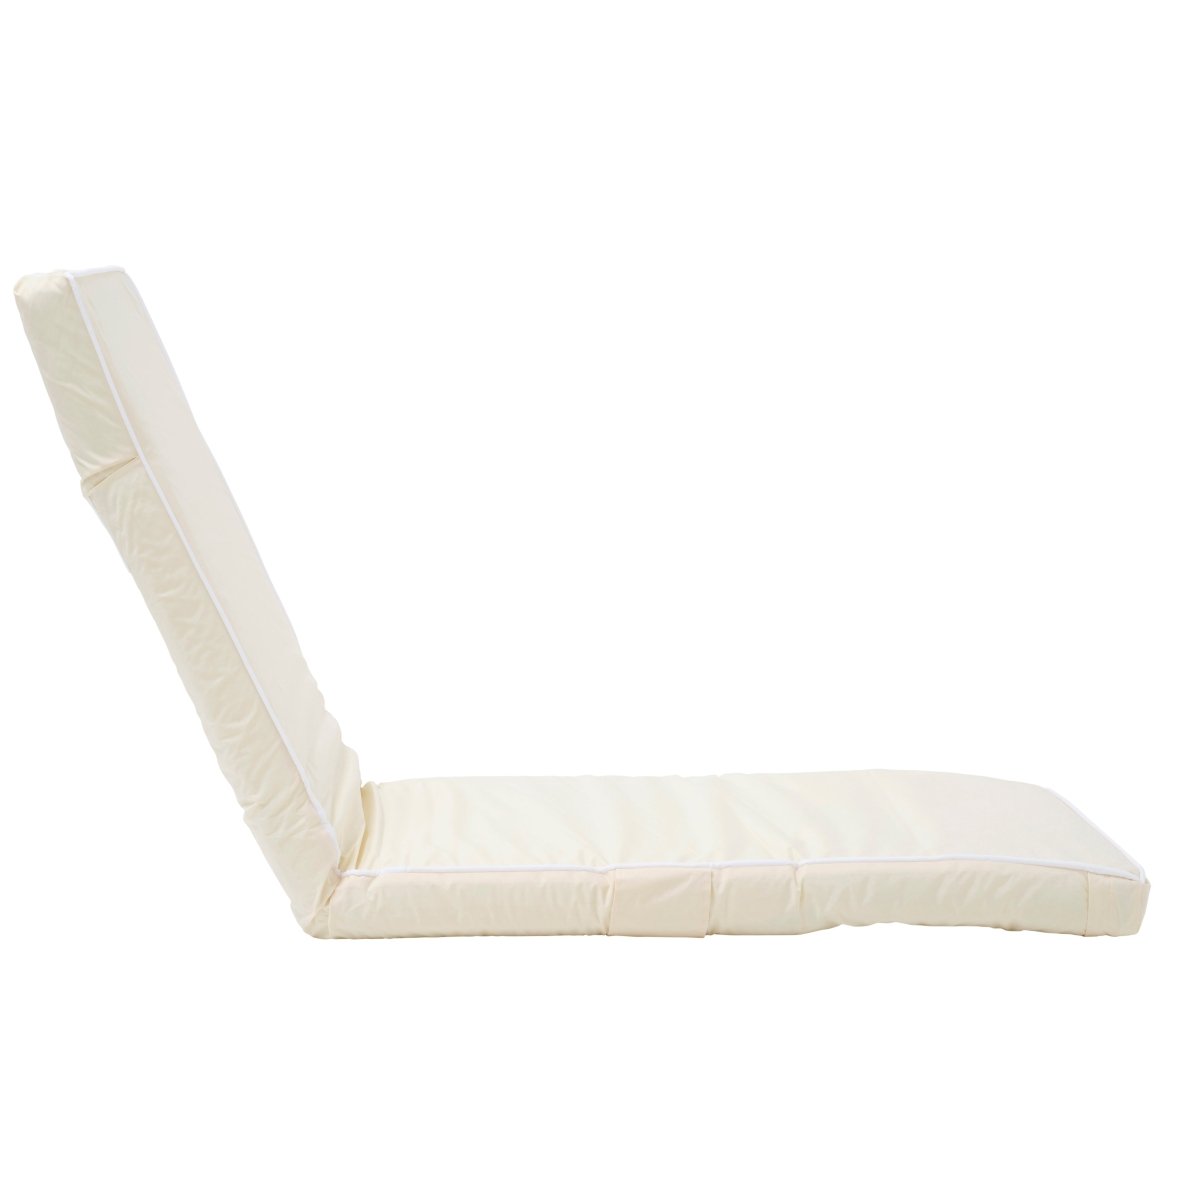 SUNNYLiFE The Lounger Chair Sand - S31LNGSN